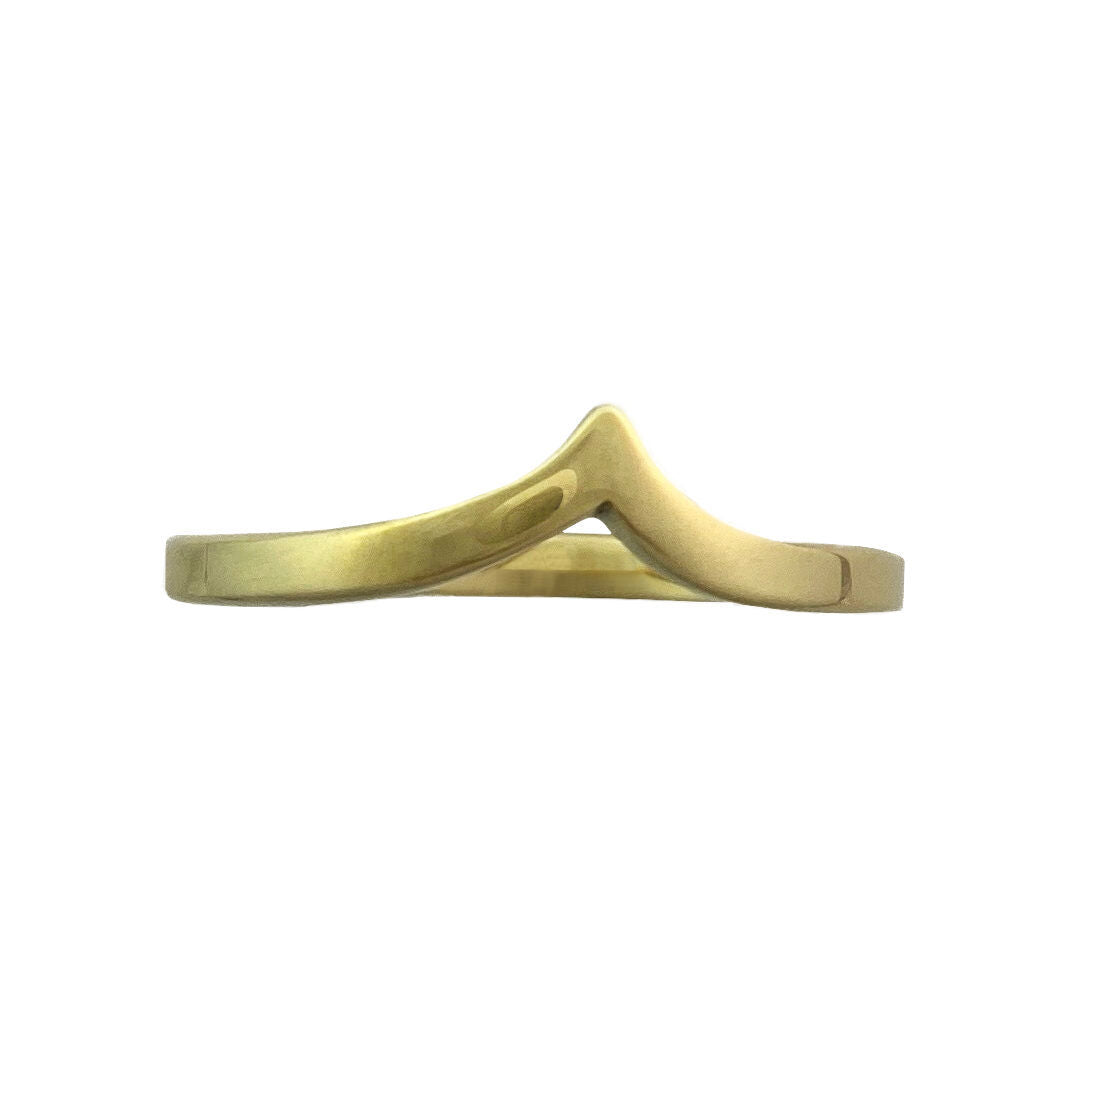 Eternal Wave 18ct Gold Ring - Boutee